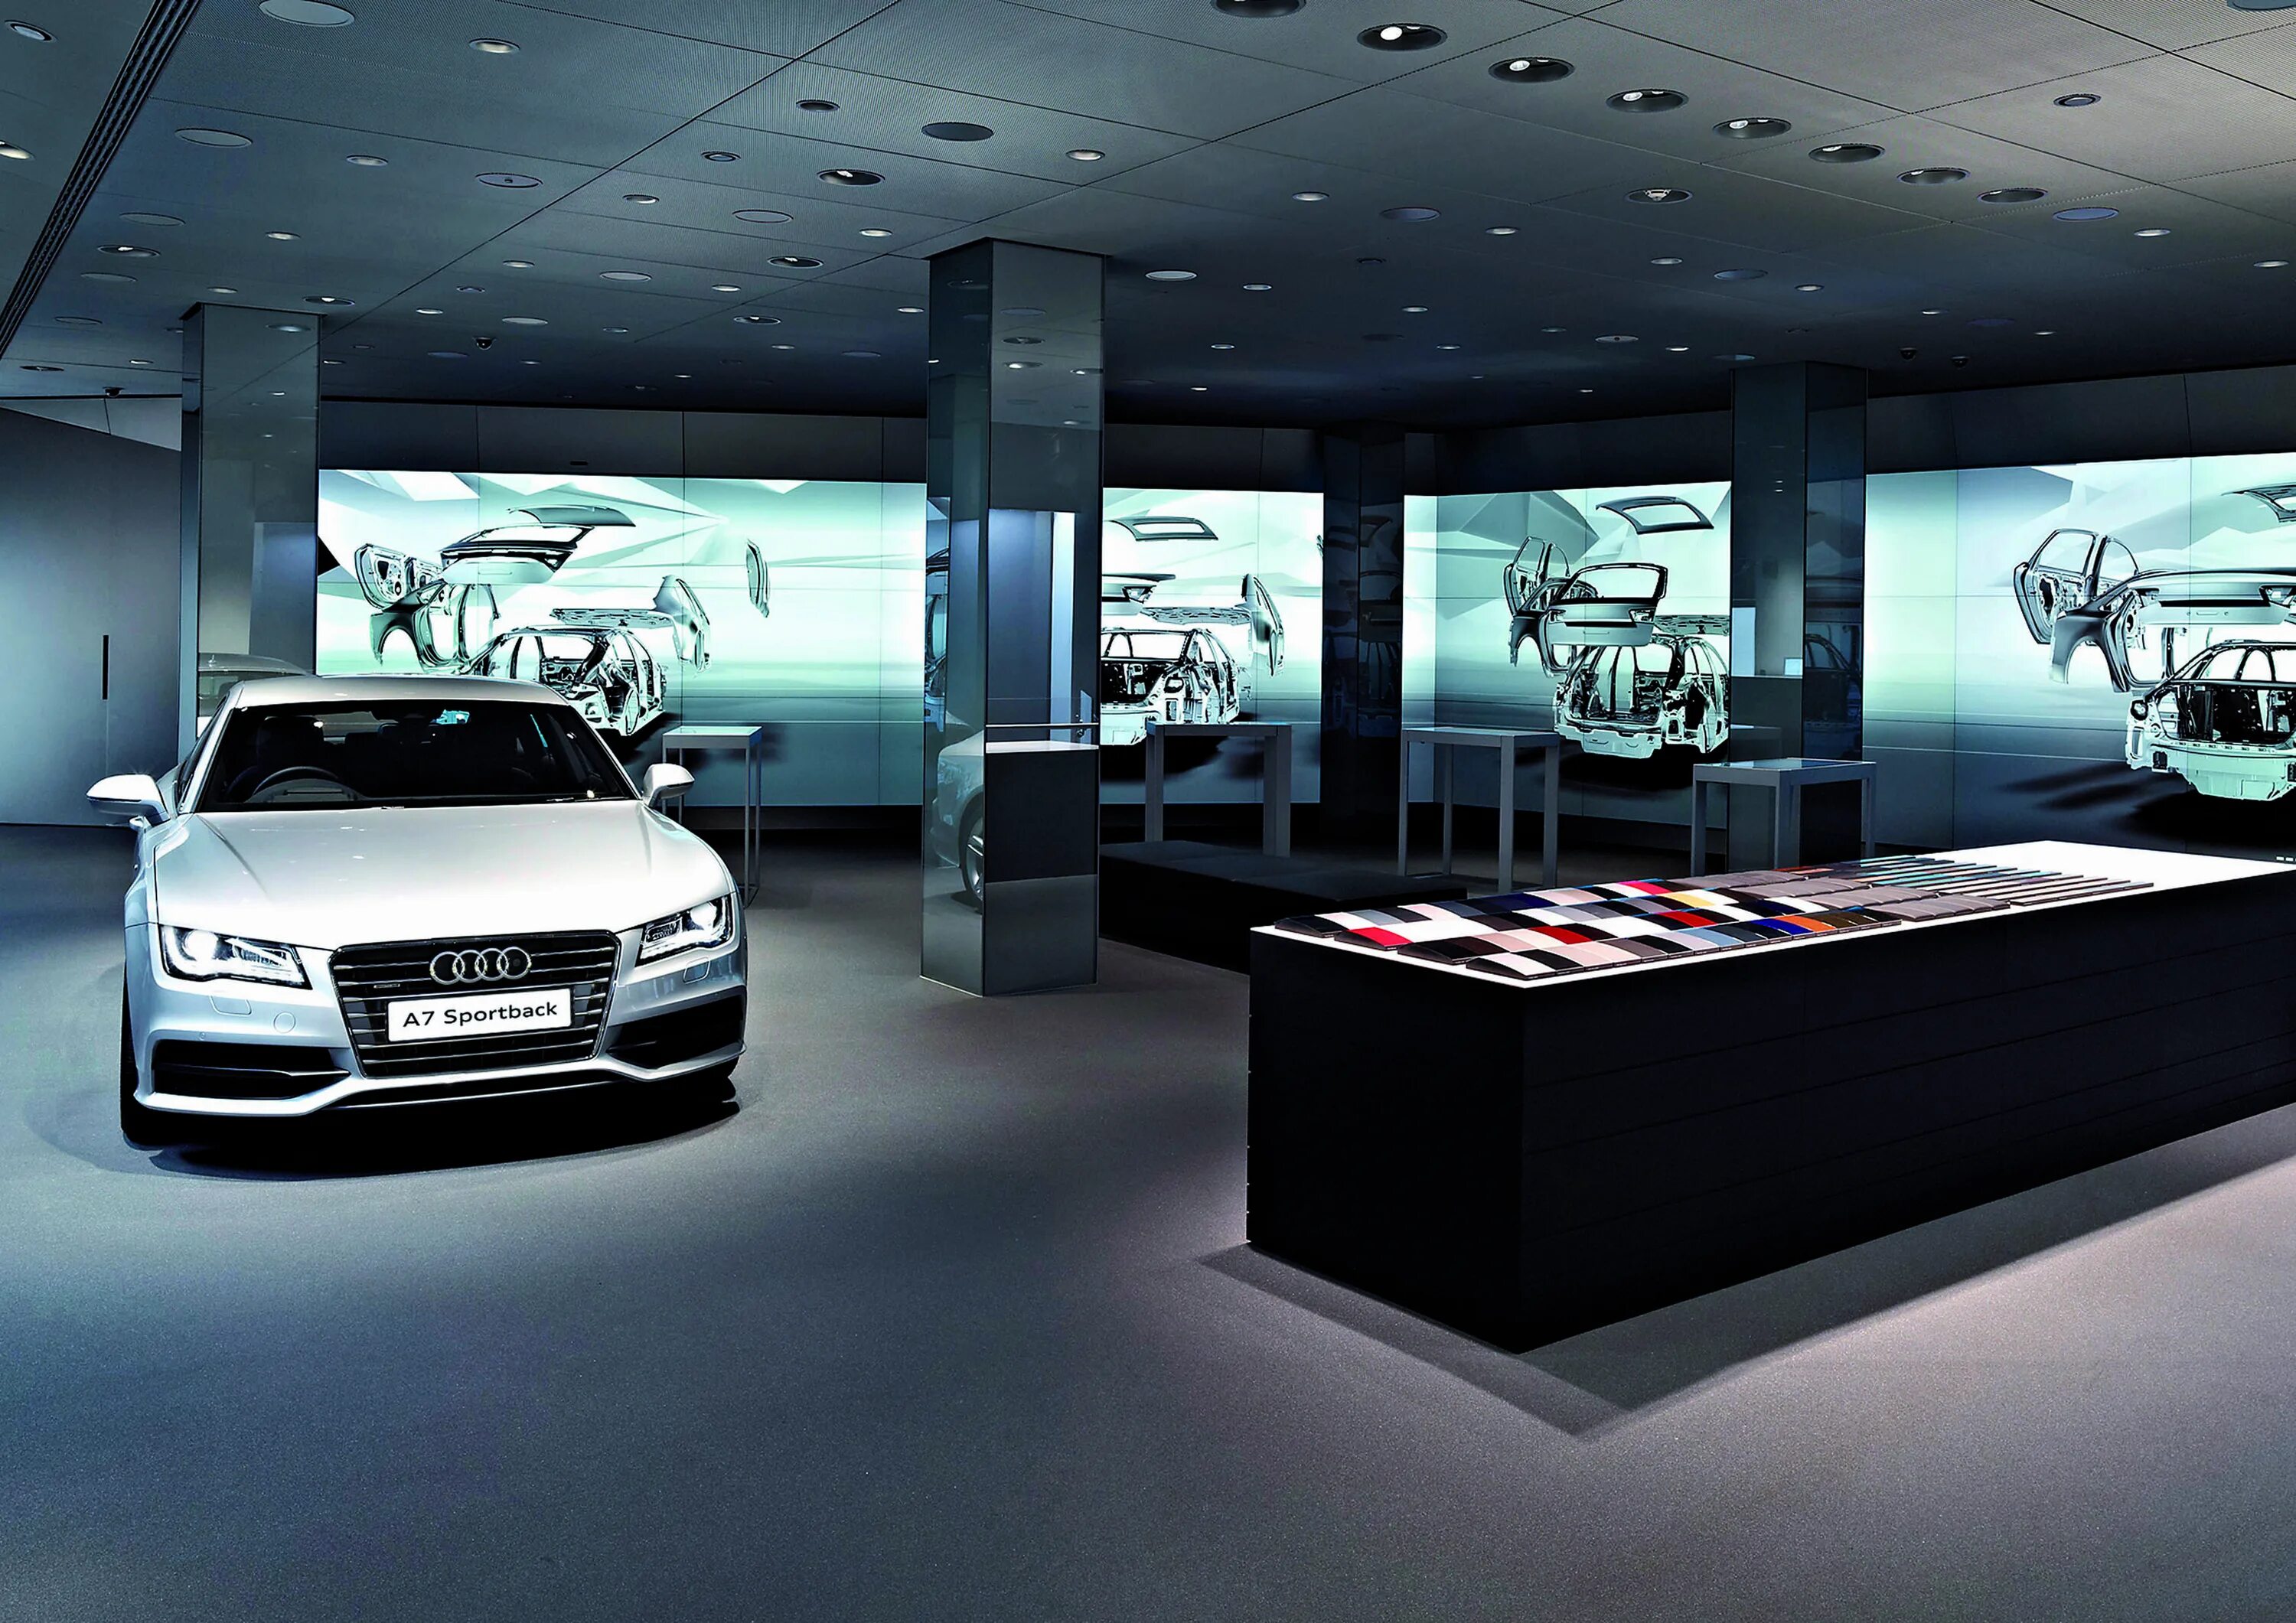 That is car in the shop. Audi Showroom. Шоу рум Ауди. Интерьер автосалона. Шоу рум автосалона.